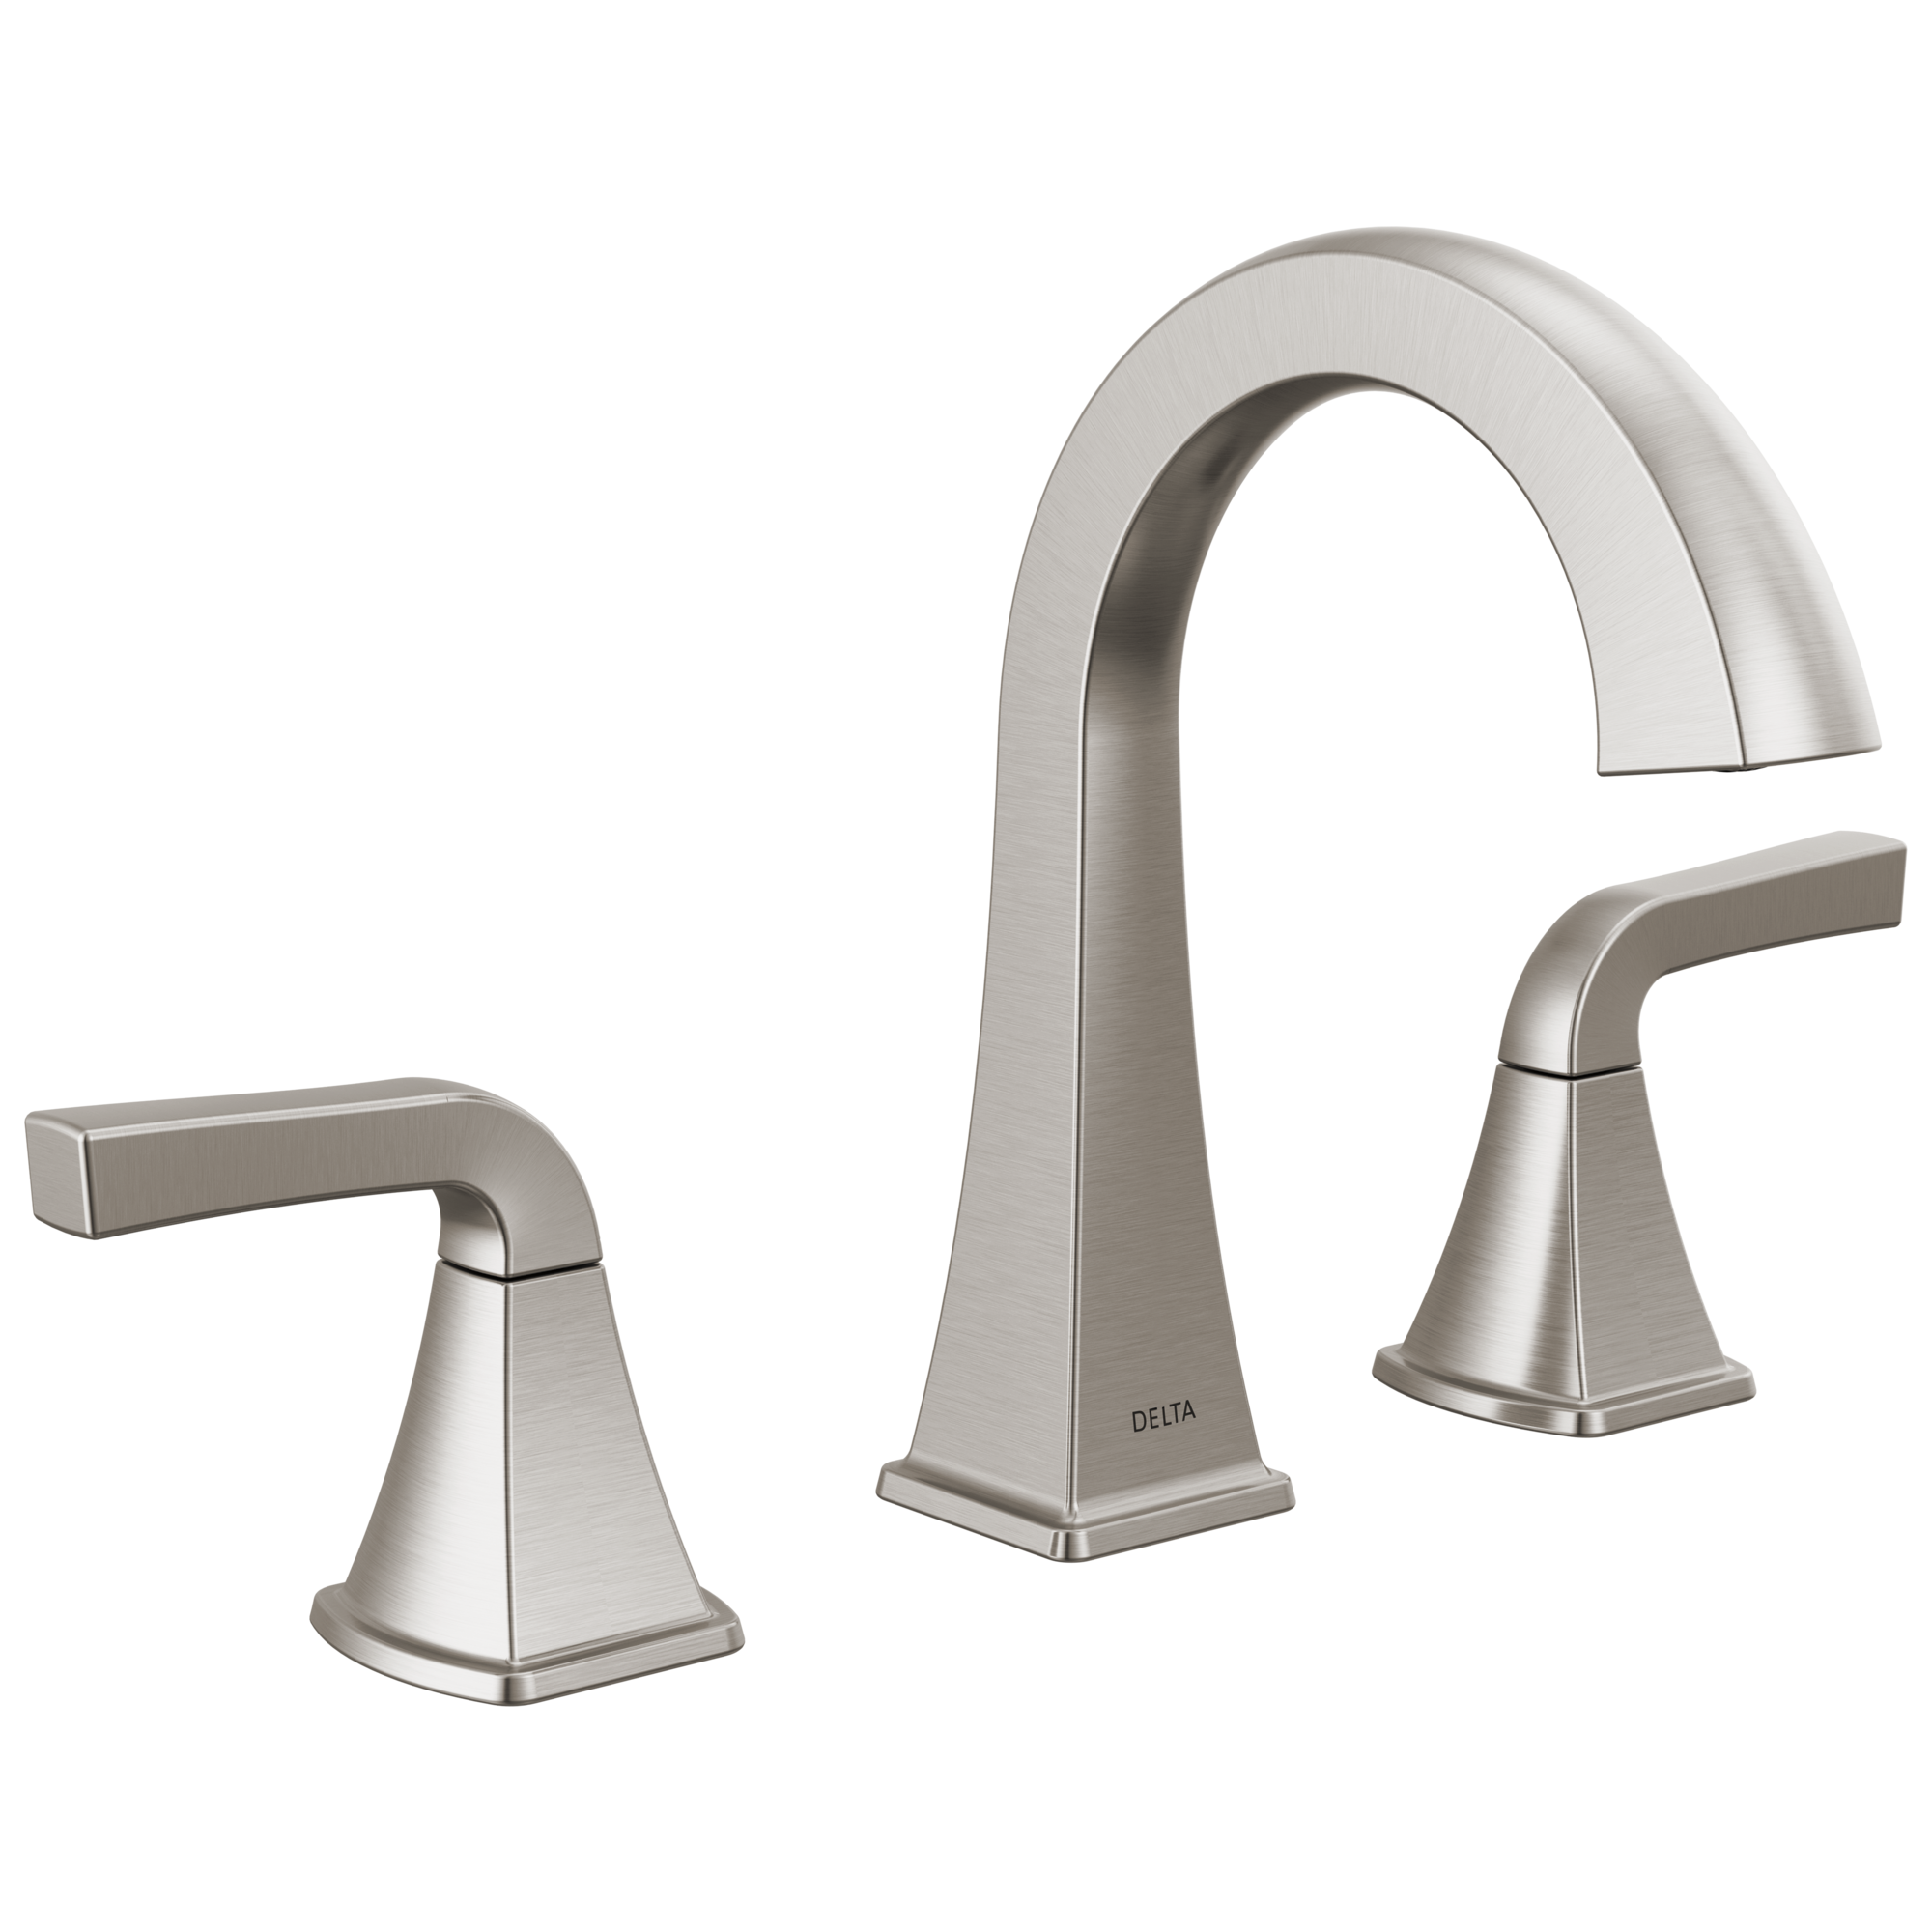 Two Handle Widespread Bathroom Faucet in Stainless